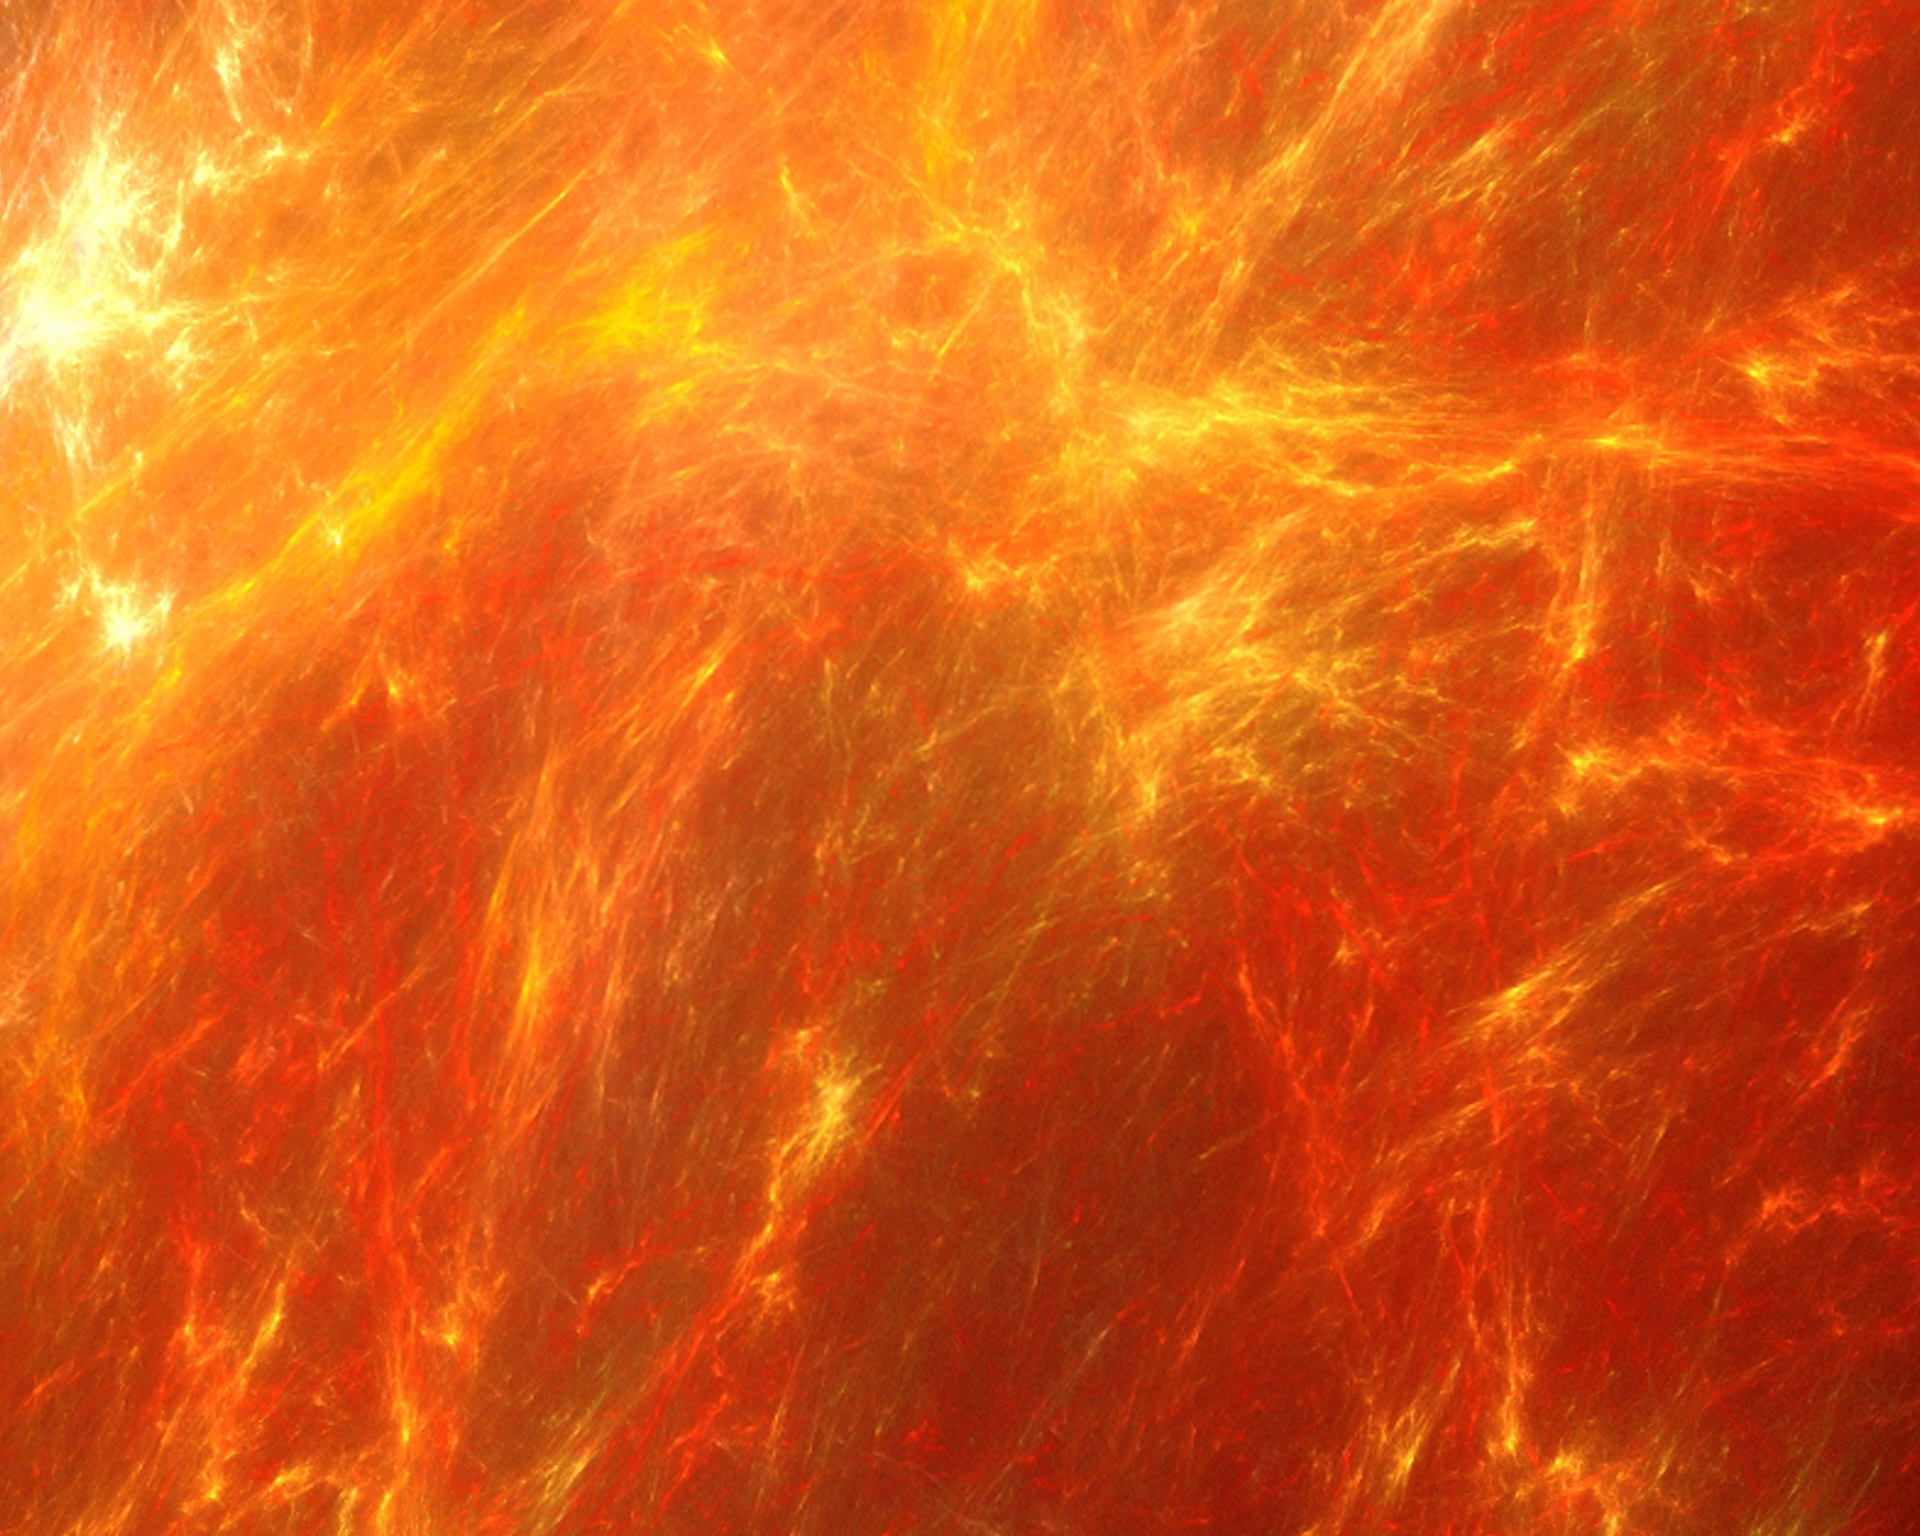 Fire: One of the four elements, look how this image appears to be engulfed in flames